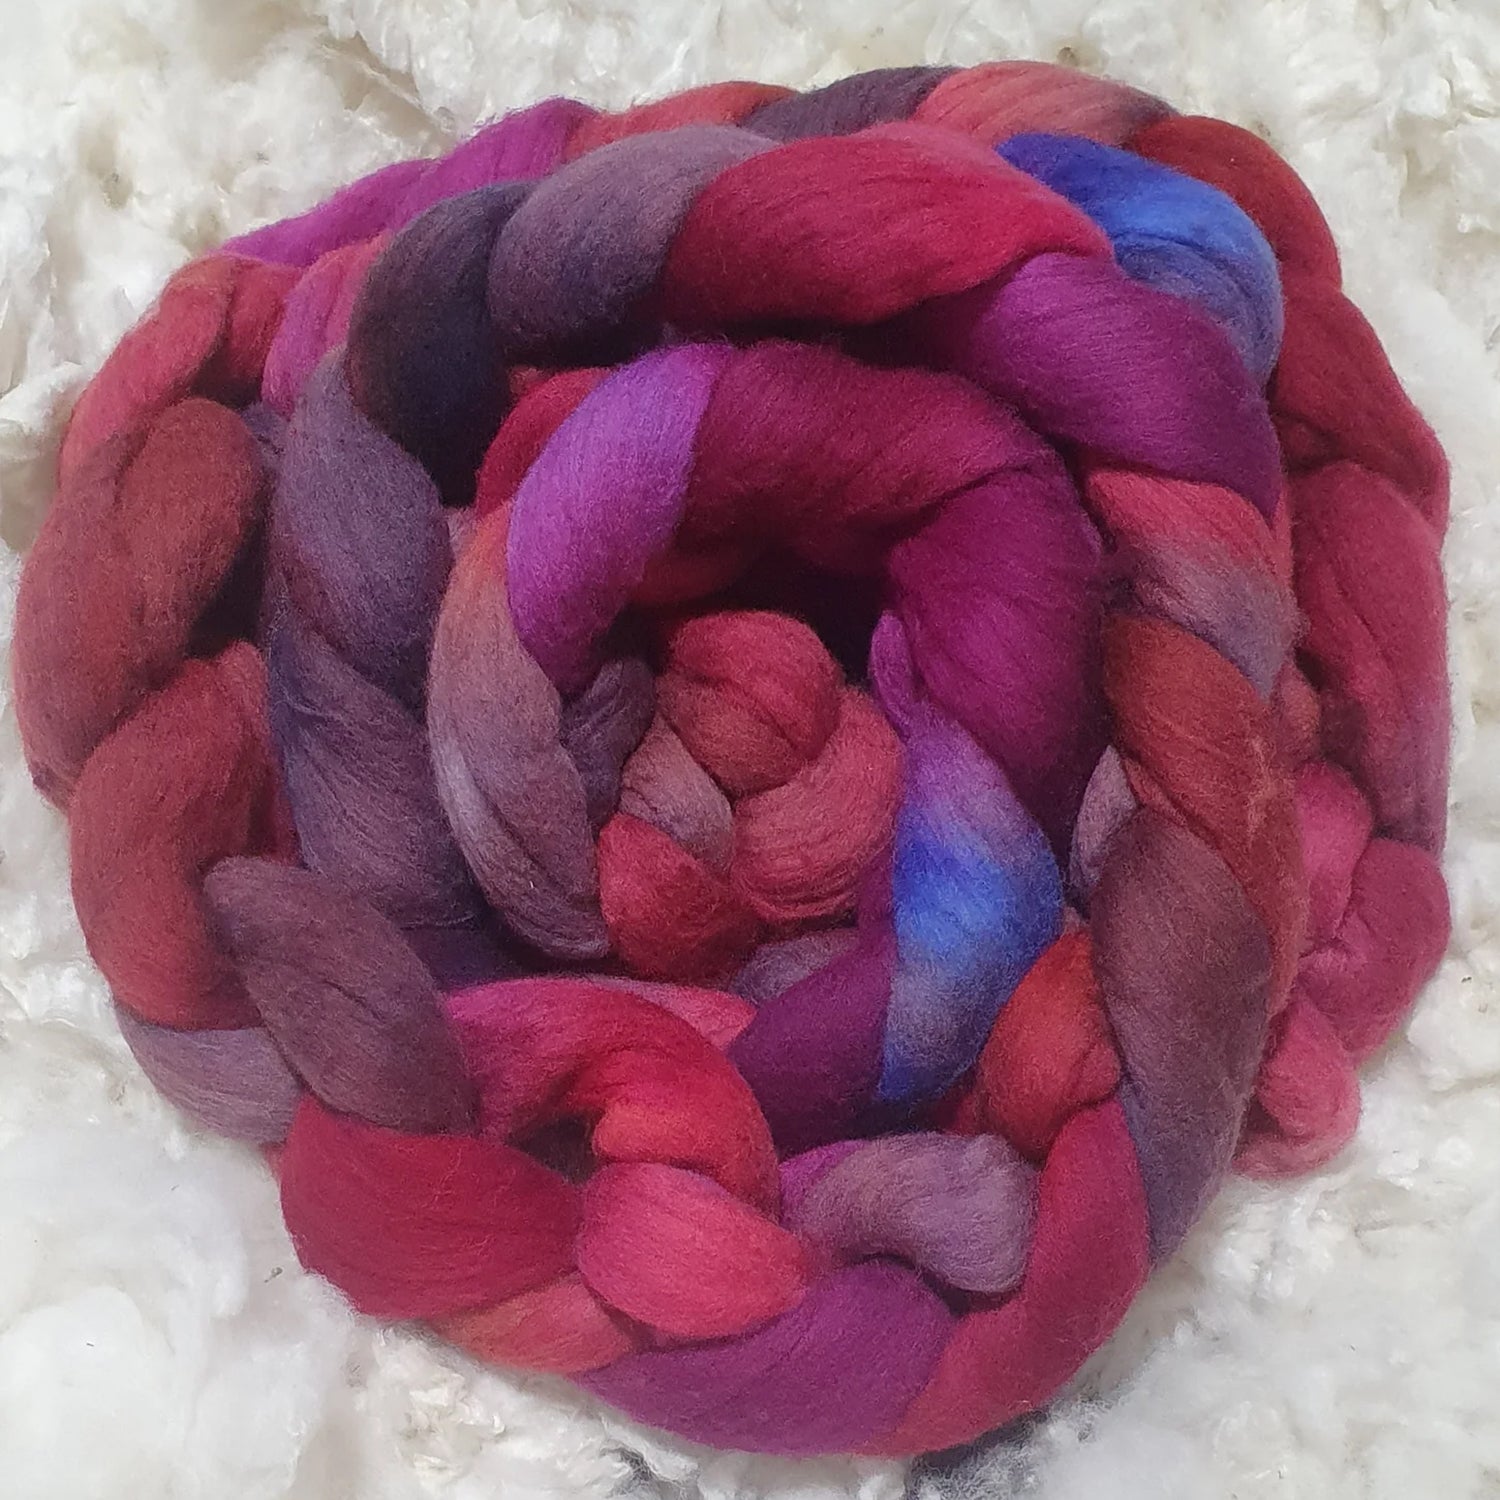 HAND DYED WOOL TOP / SLIVER / ROVING - 200GRAMS - DRAGONS BLOOD